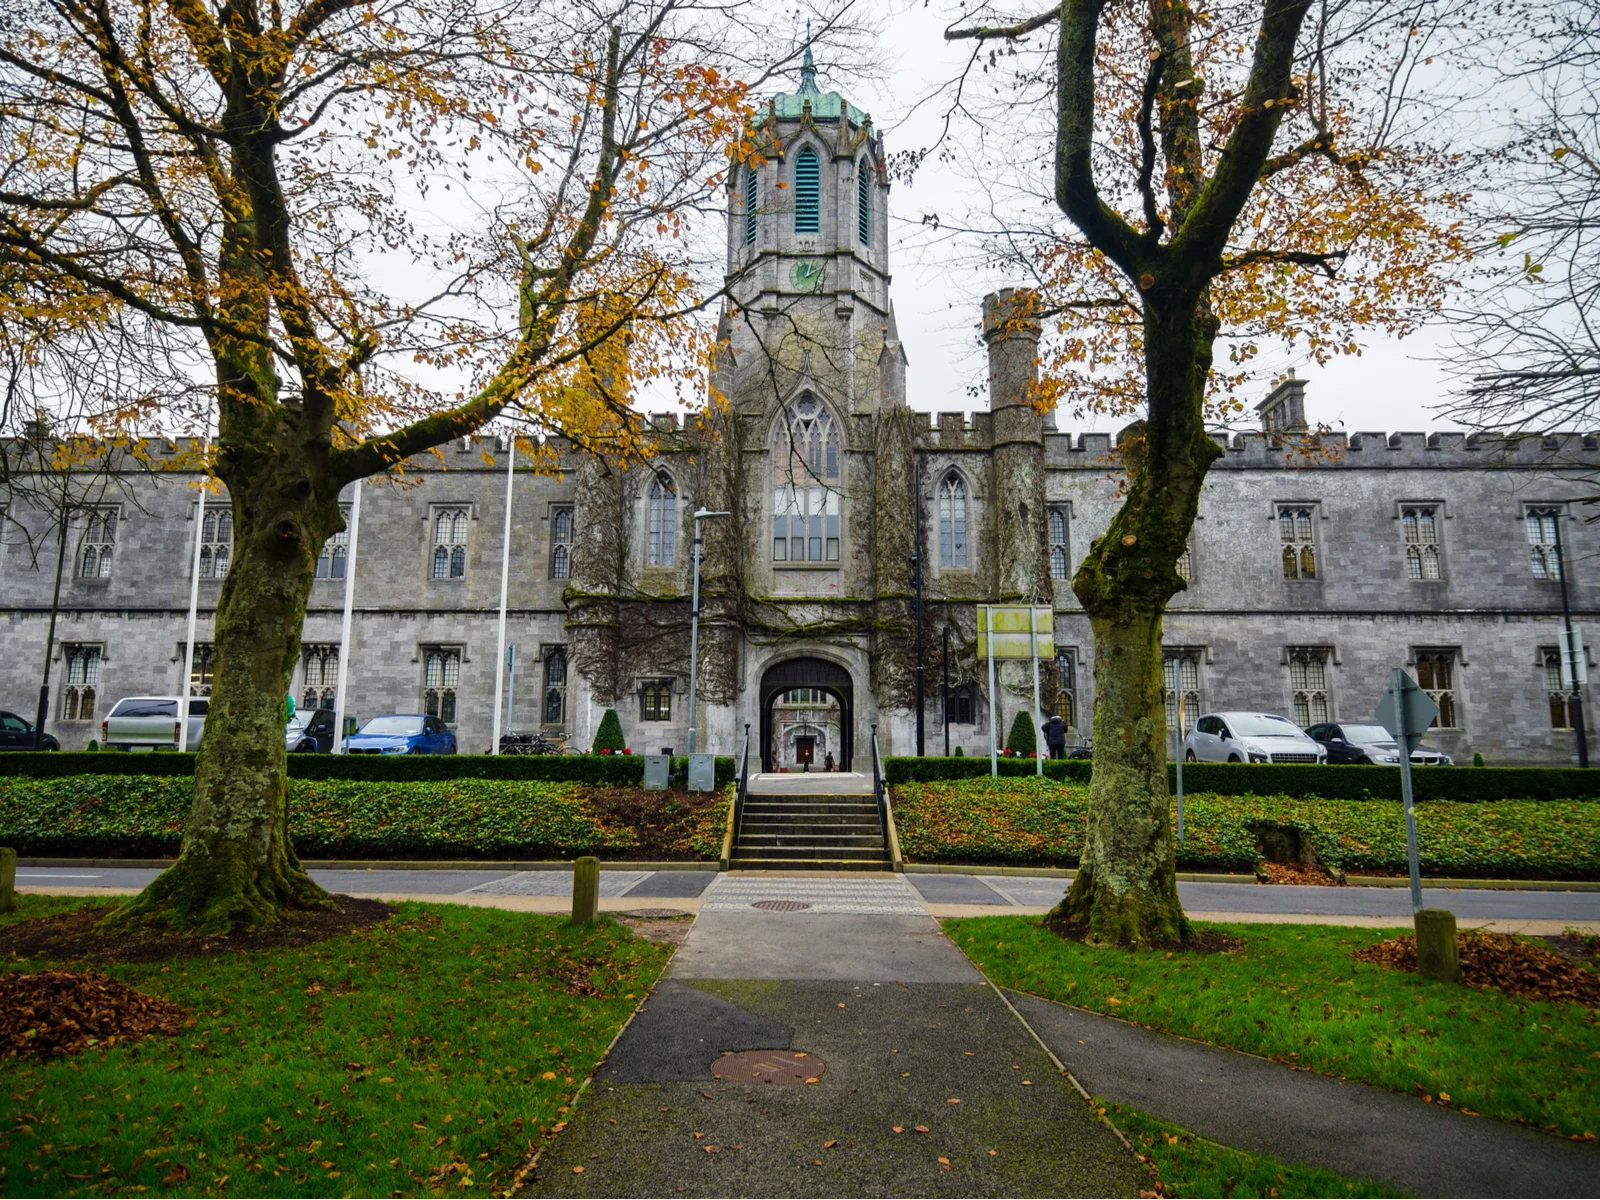 Fall on National University of Ireland in Galway, one of the best universities in Ireland, where cars are parked at the entrance with vines attached on its walls